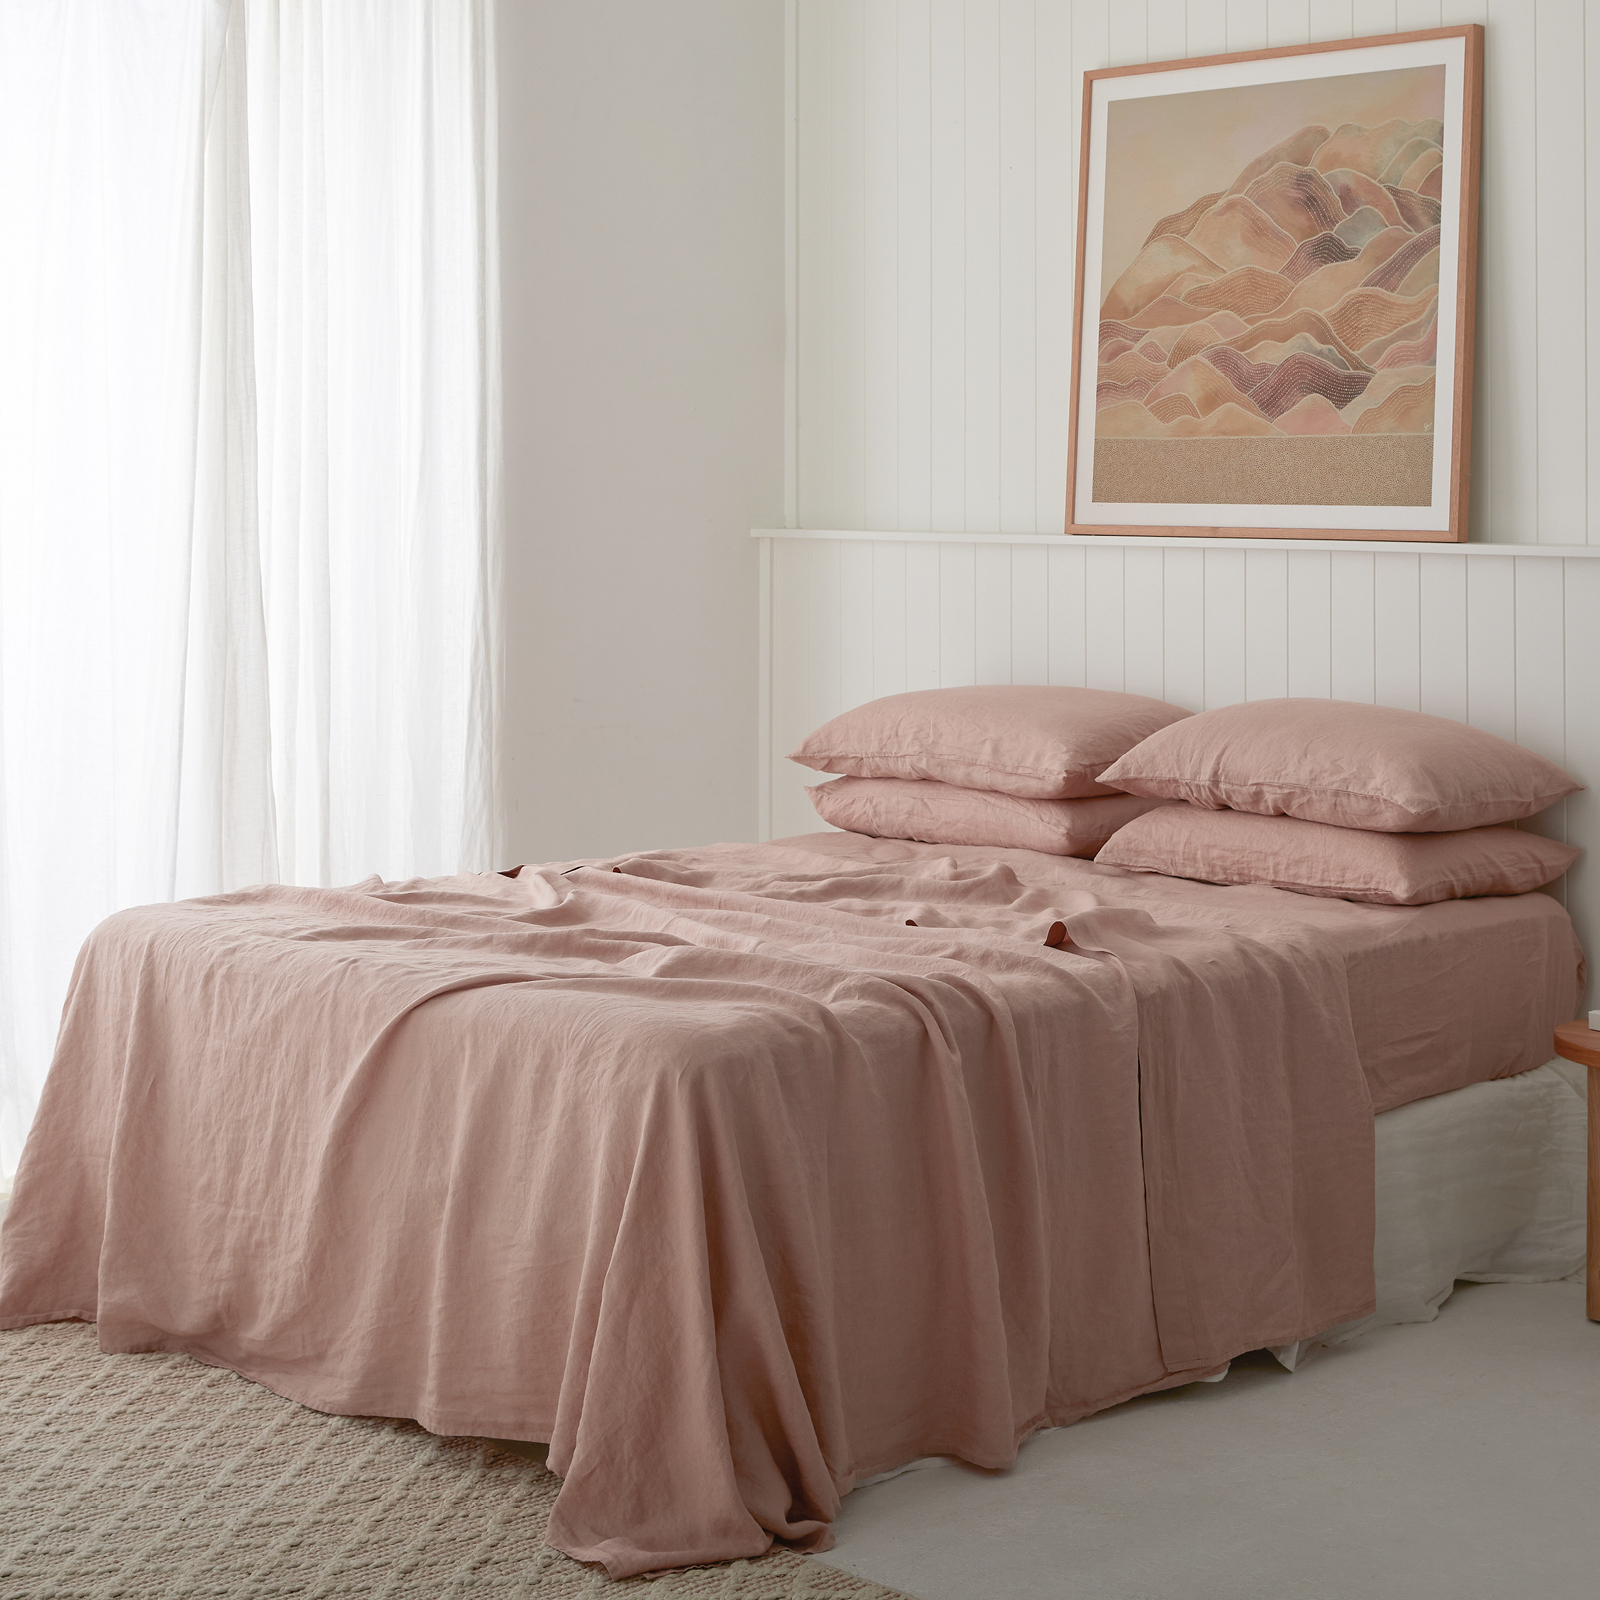 French linen flat sheet in Clay